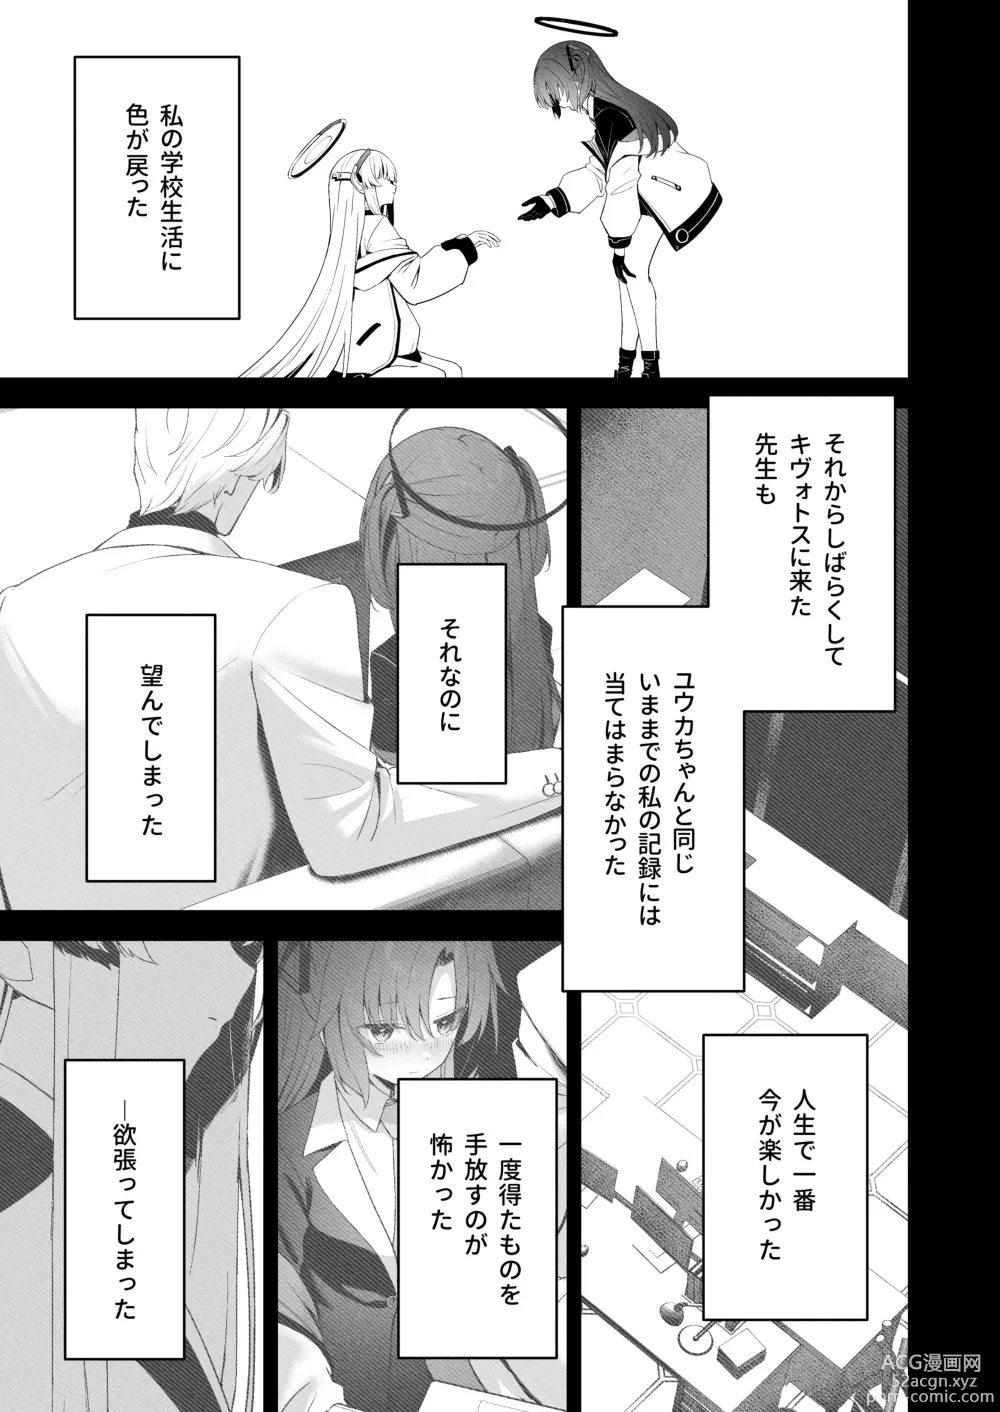 Page 10 of doujinshi Answers